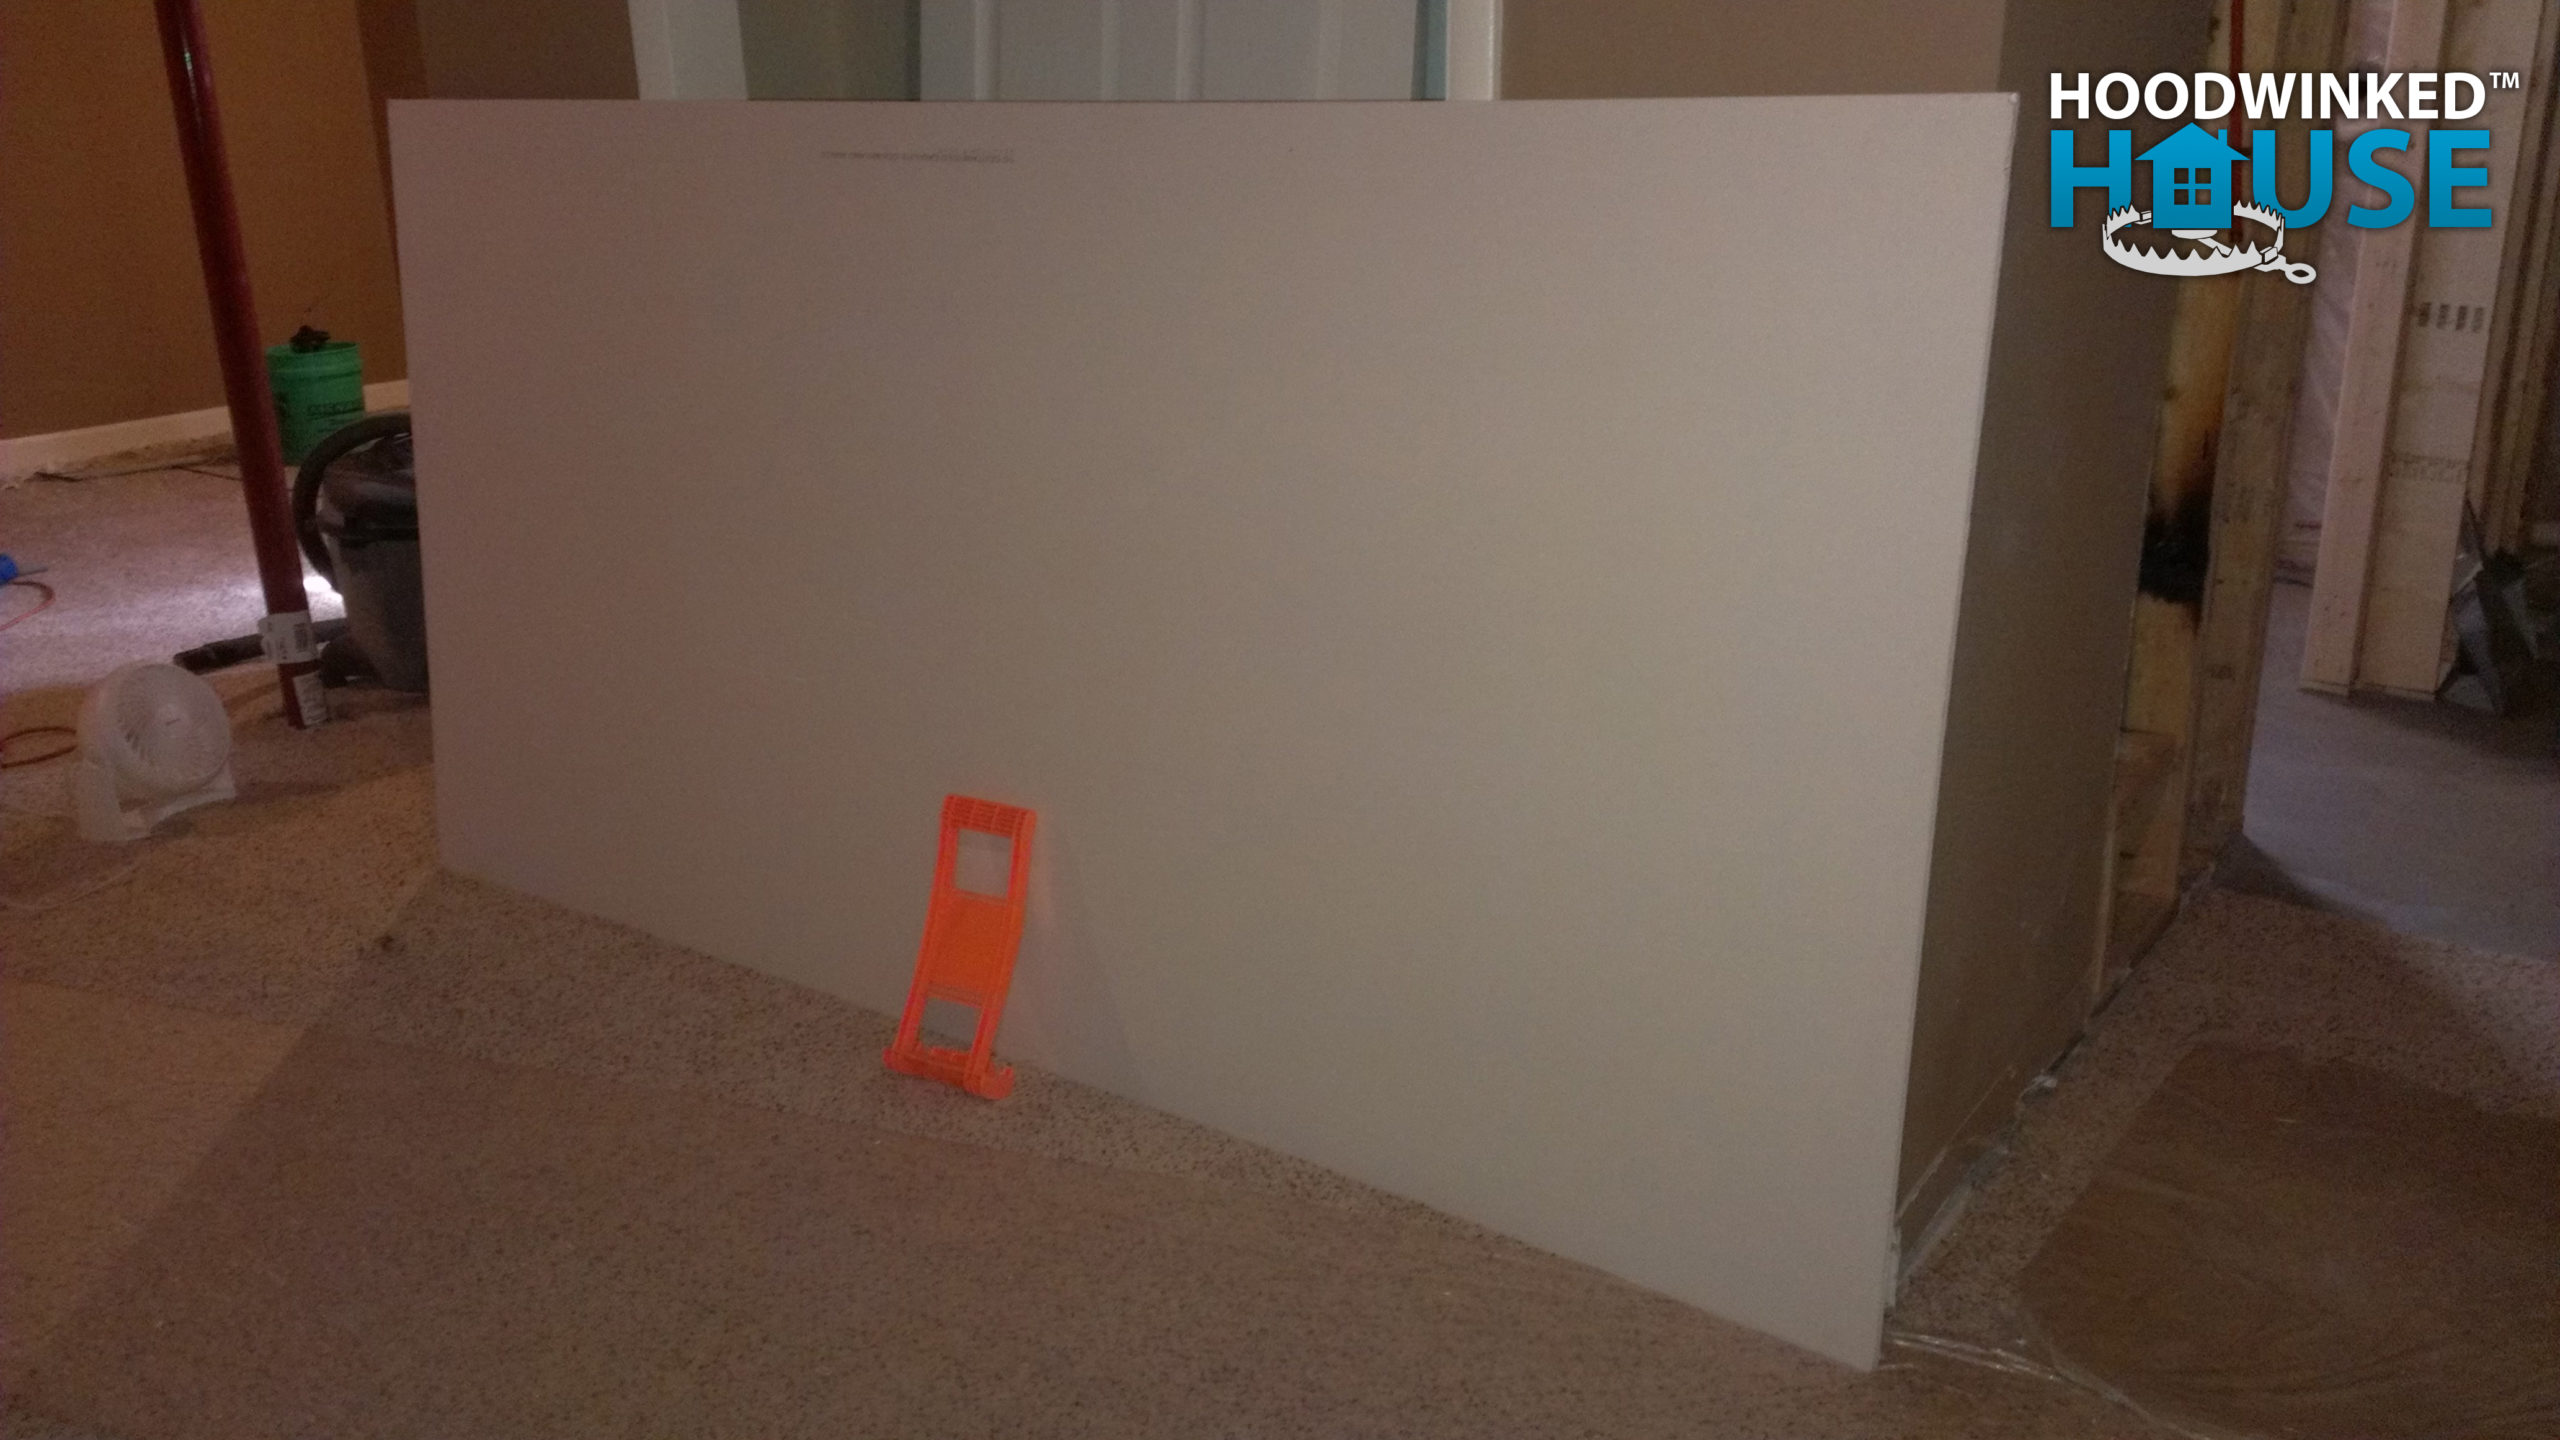 A couple sheets of drywall were purchased and carried into the basement with a carrying handle to see if they would turn a tight corner at the bottom of the staircase.